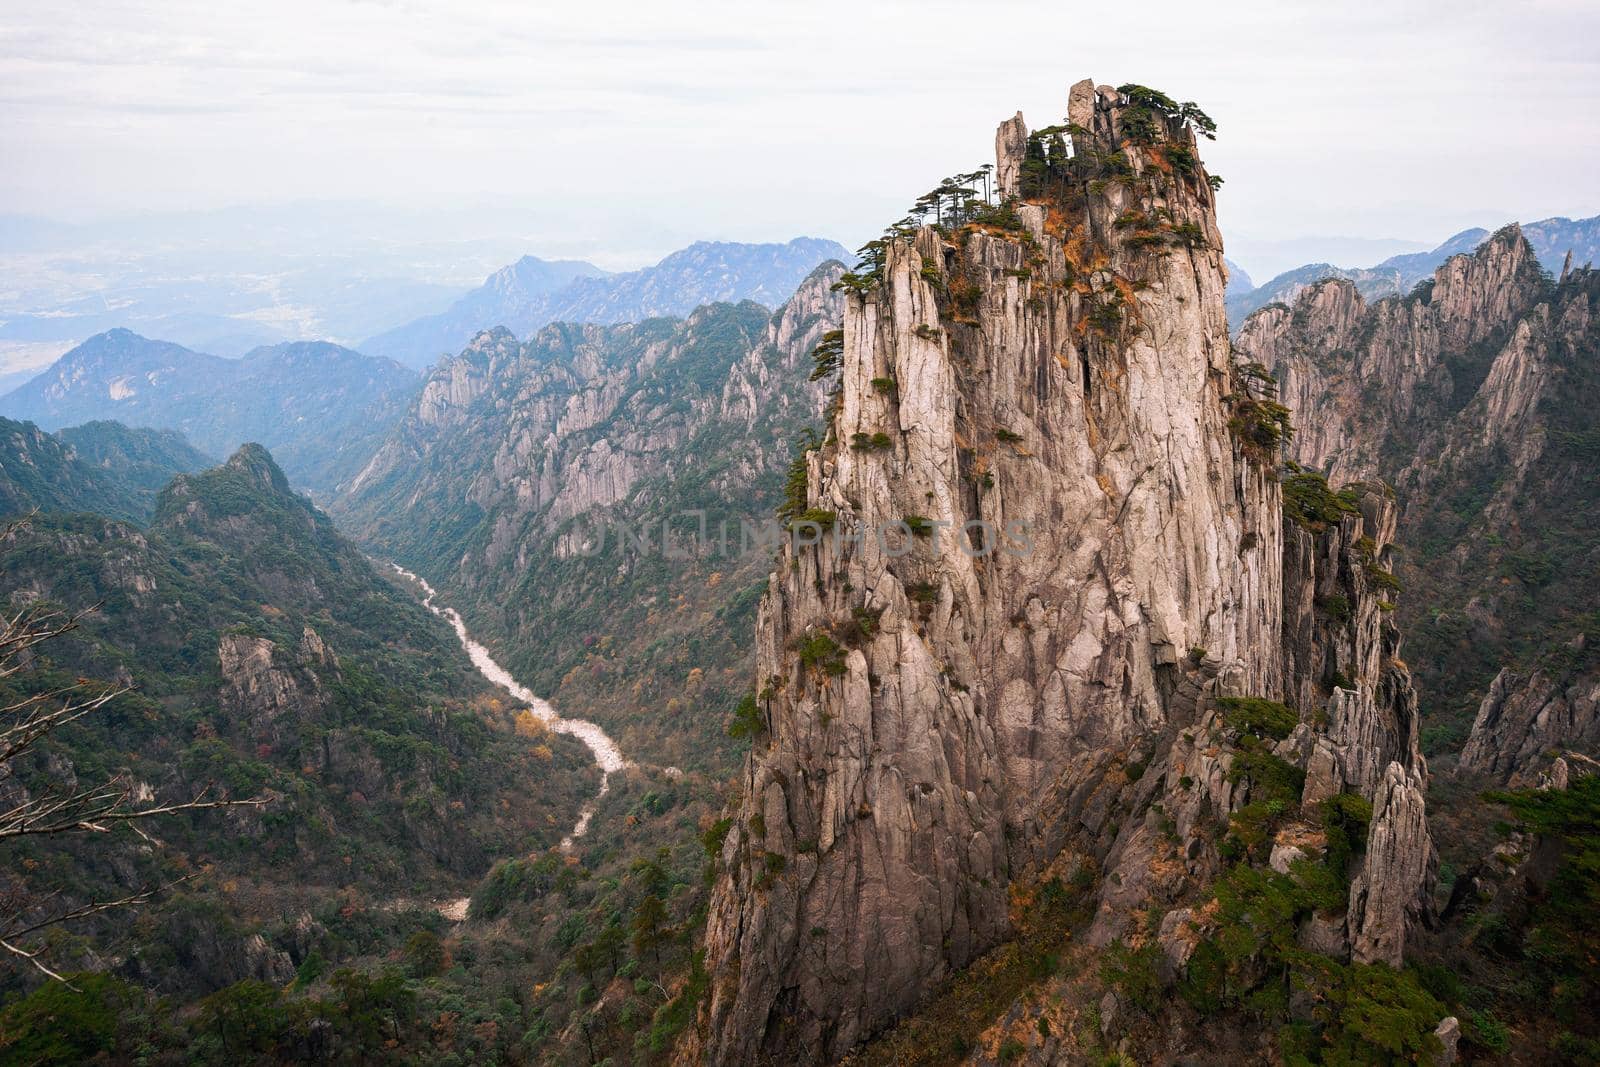 view on Shixin (Beginning-to-Believe) peak in Huangshan mountain (Yellow mountain), known as the loveliest mountain of China, World Natural and Cultural Heritage site by UNESCO, Anhui, China.